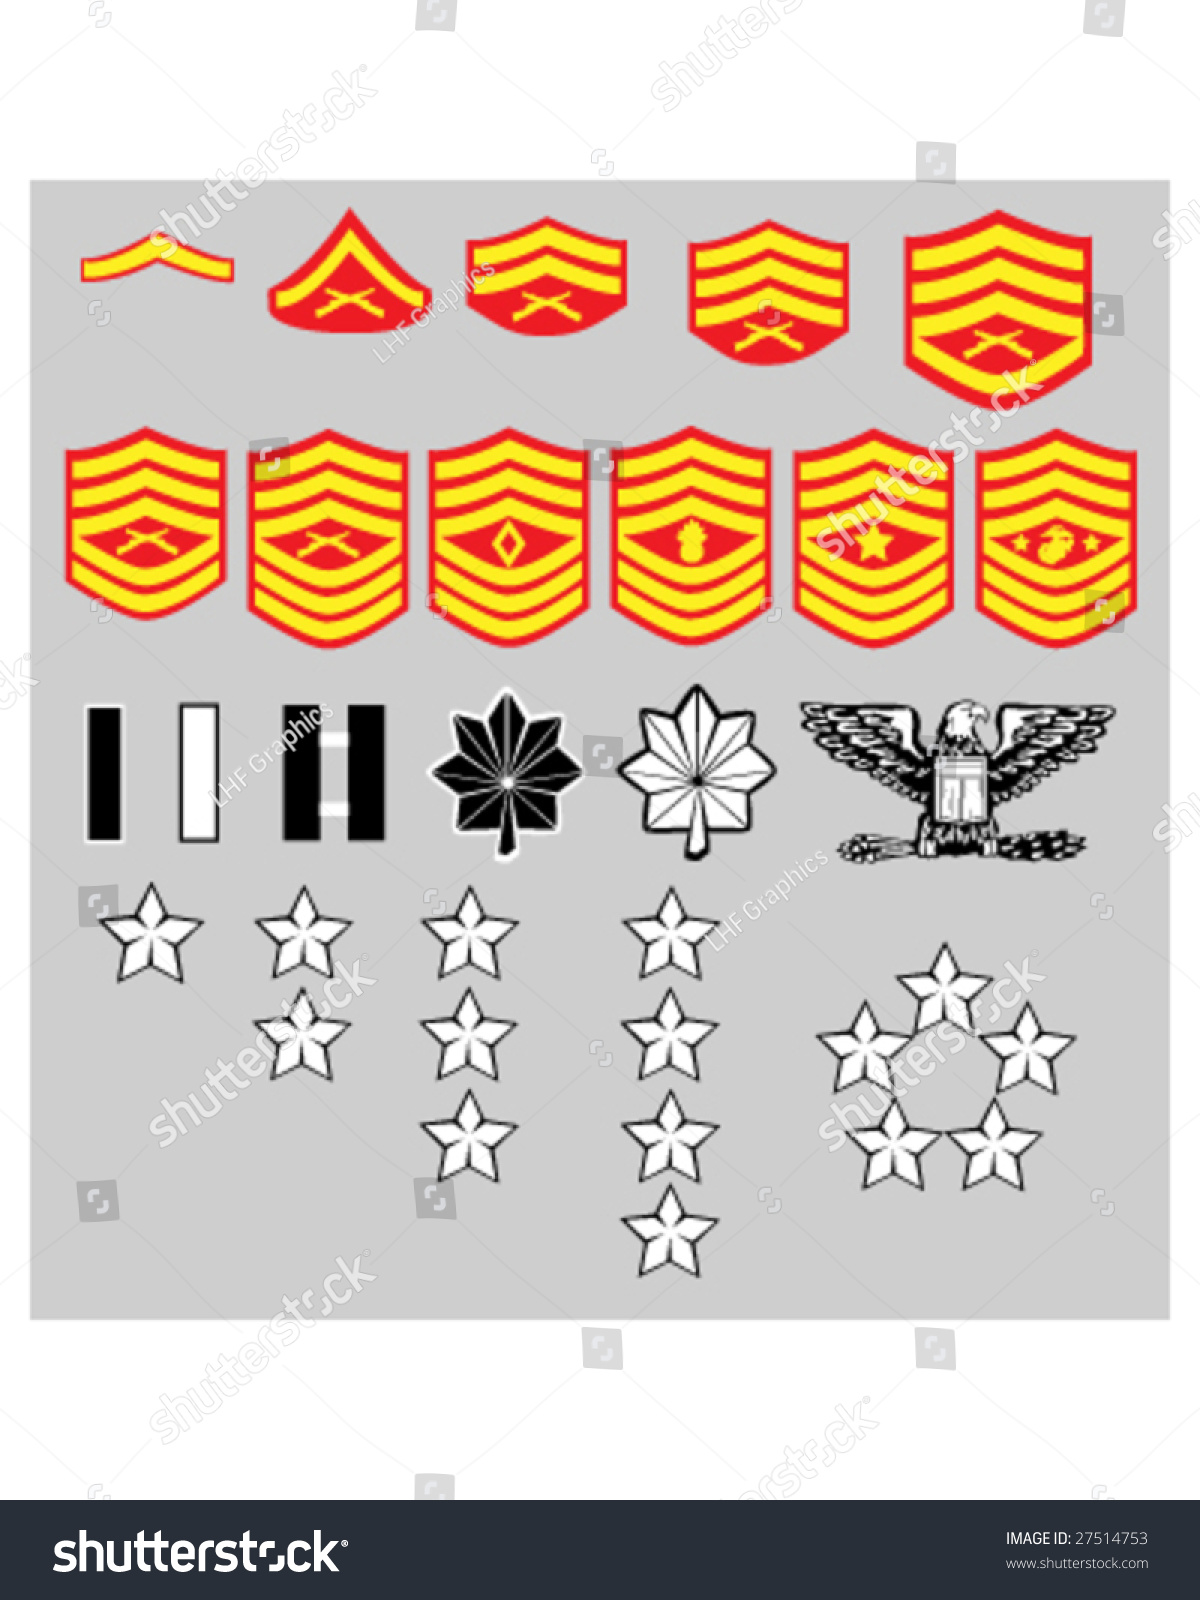 Us Marine Corps Rank Insignia Officers Stock Vector 27514753 Shutterstock